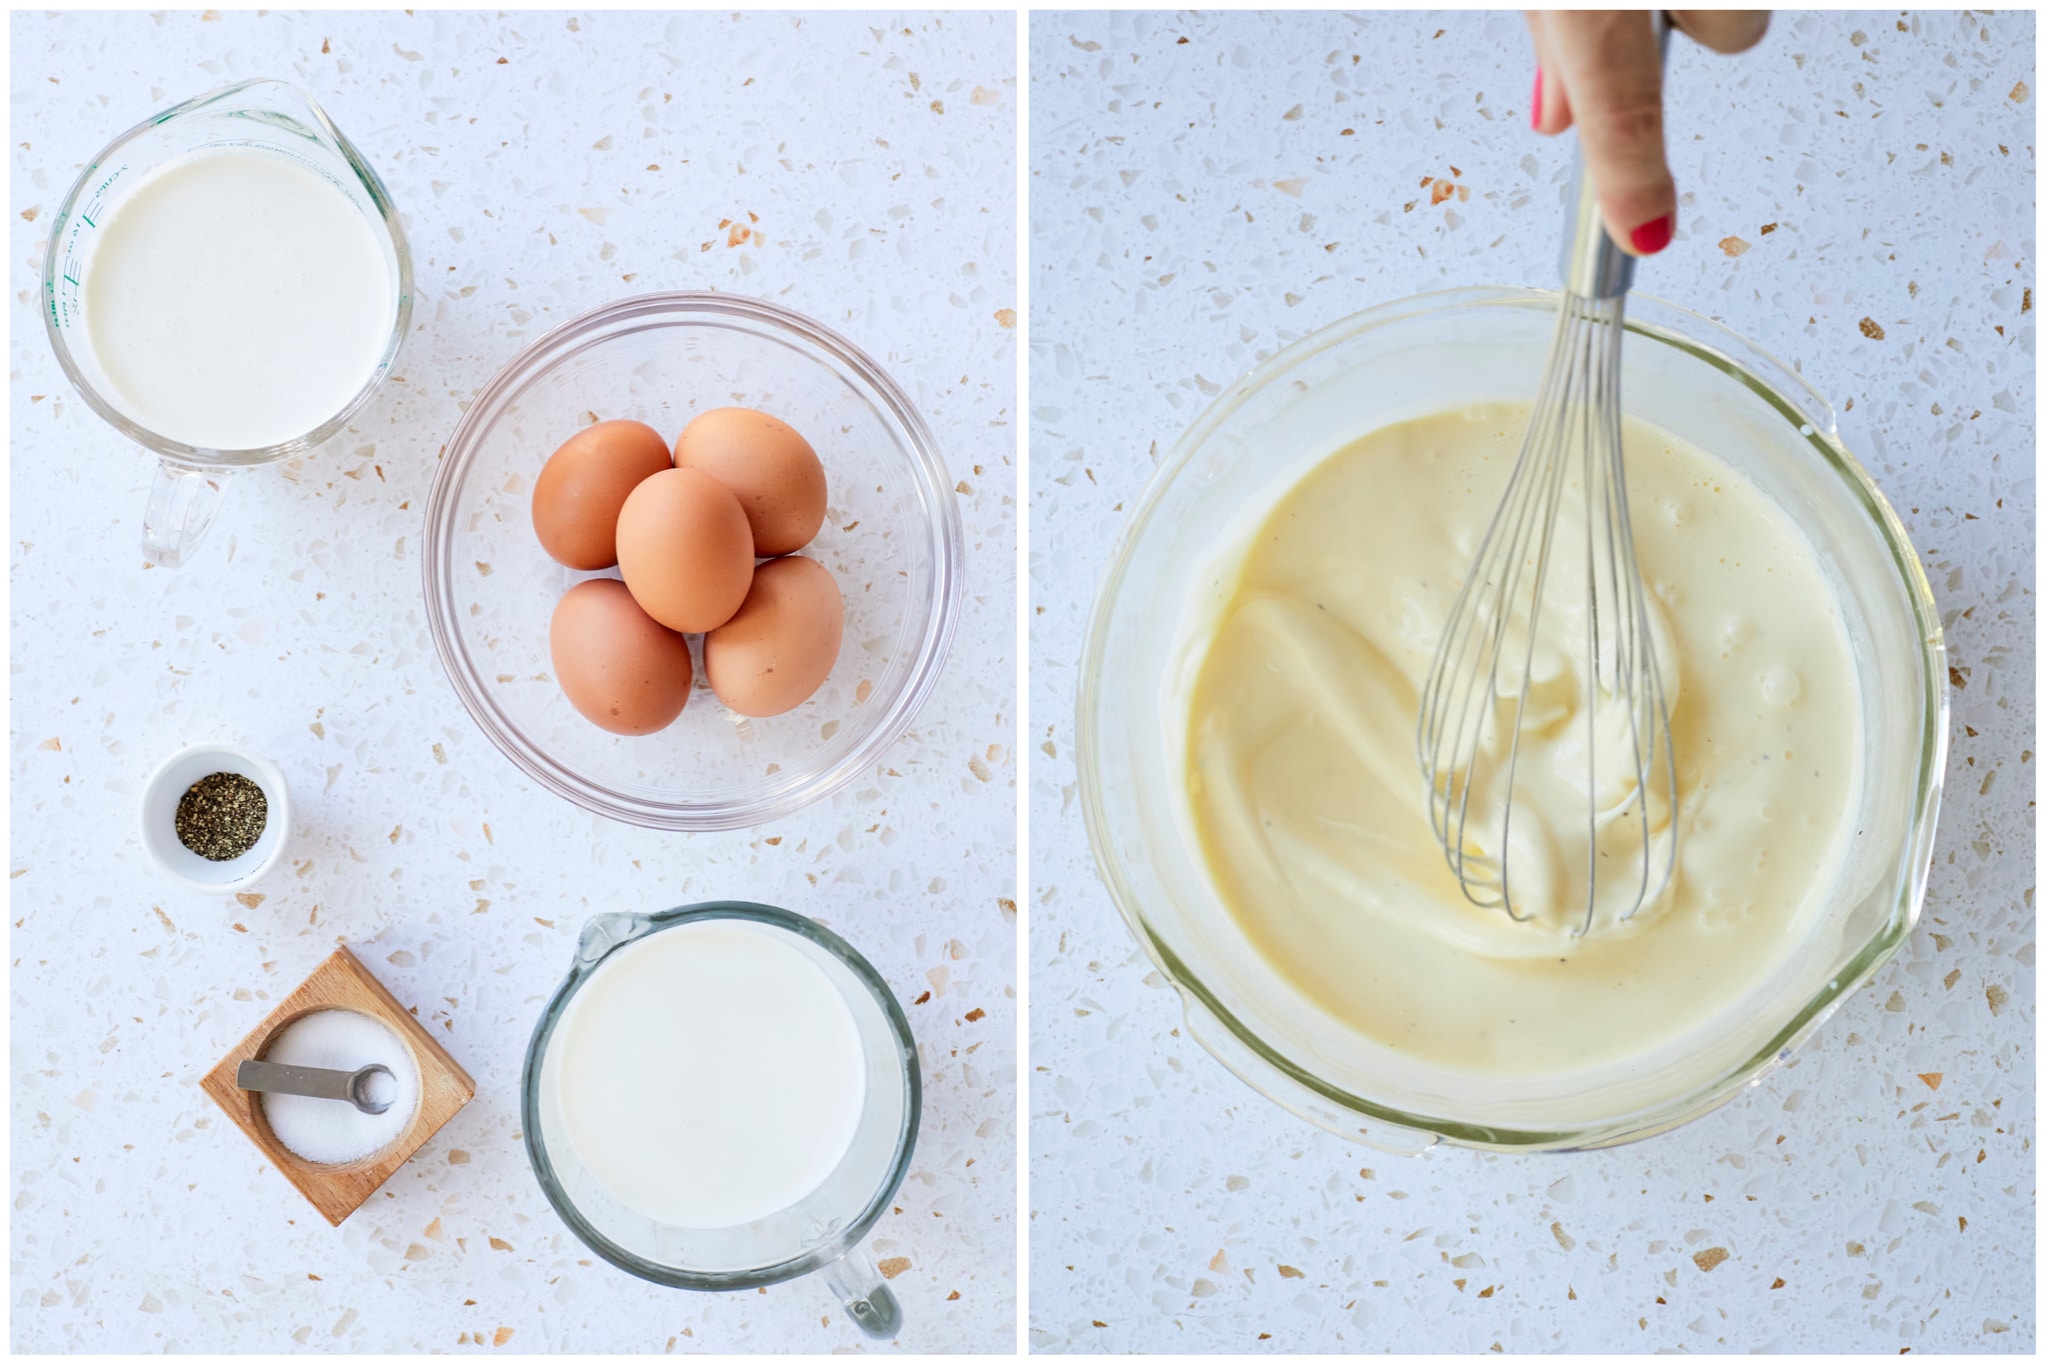 A side-by-side photos show the ingredients of quiche custard. On the left there are two liquid measuring cups filled with milk and heavy cream, brown eggs in a bowl, and salt, and pepper in serving dishes. On the right, the ingredients have been whisked together.